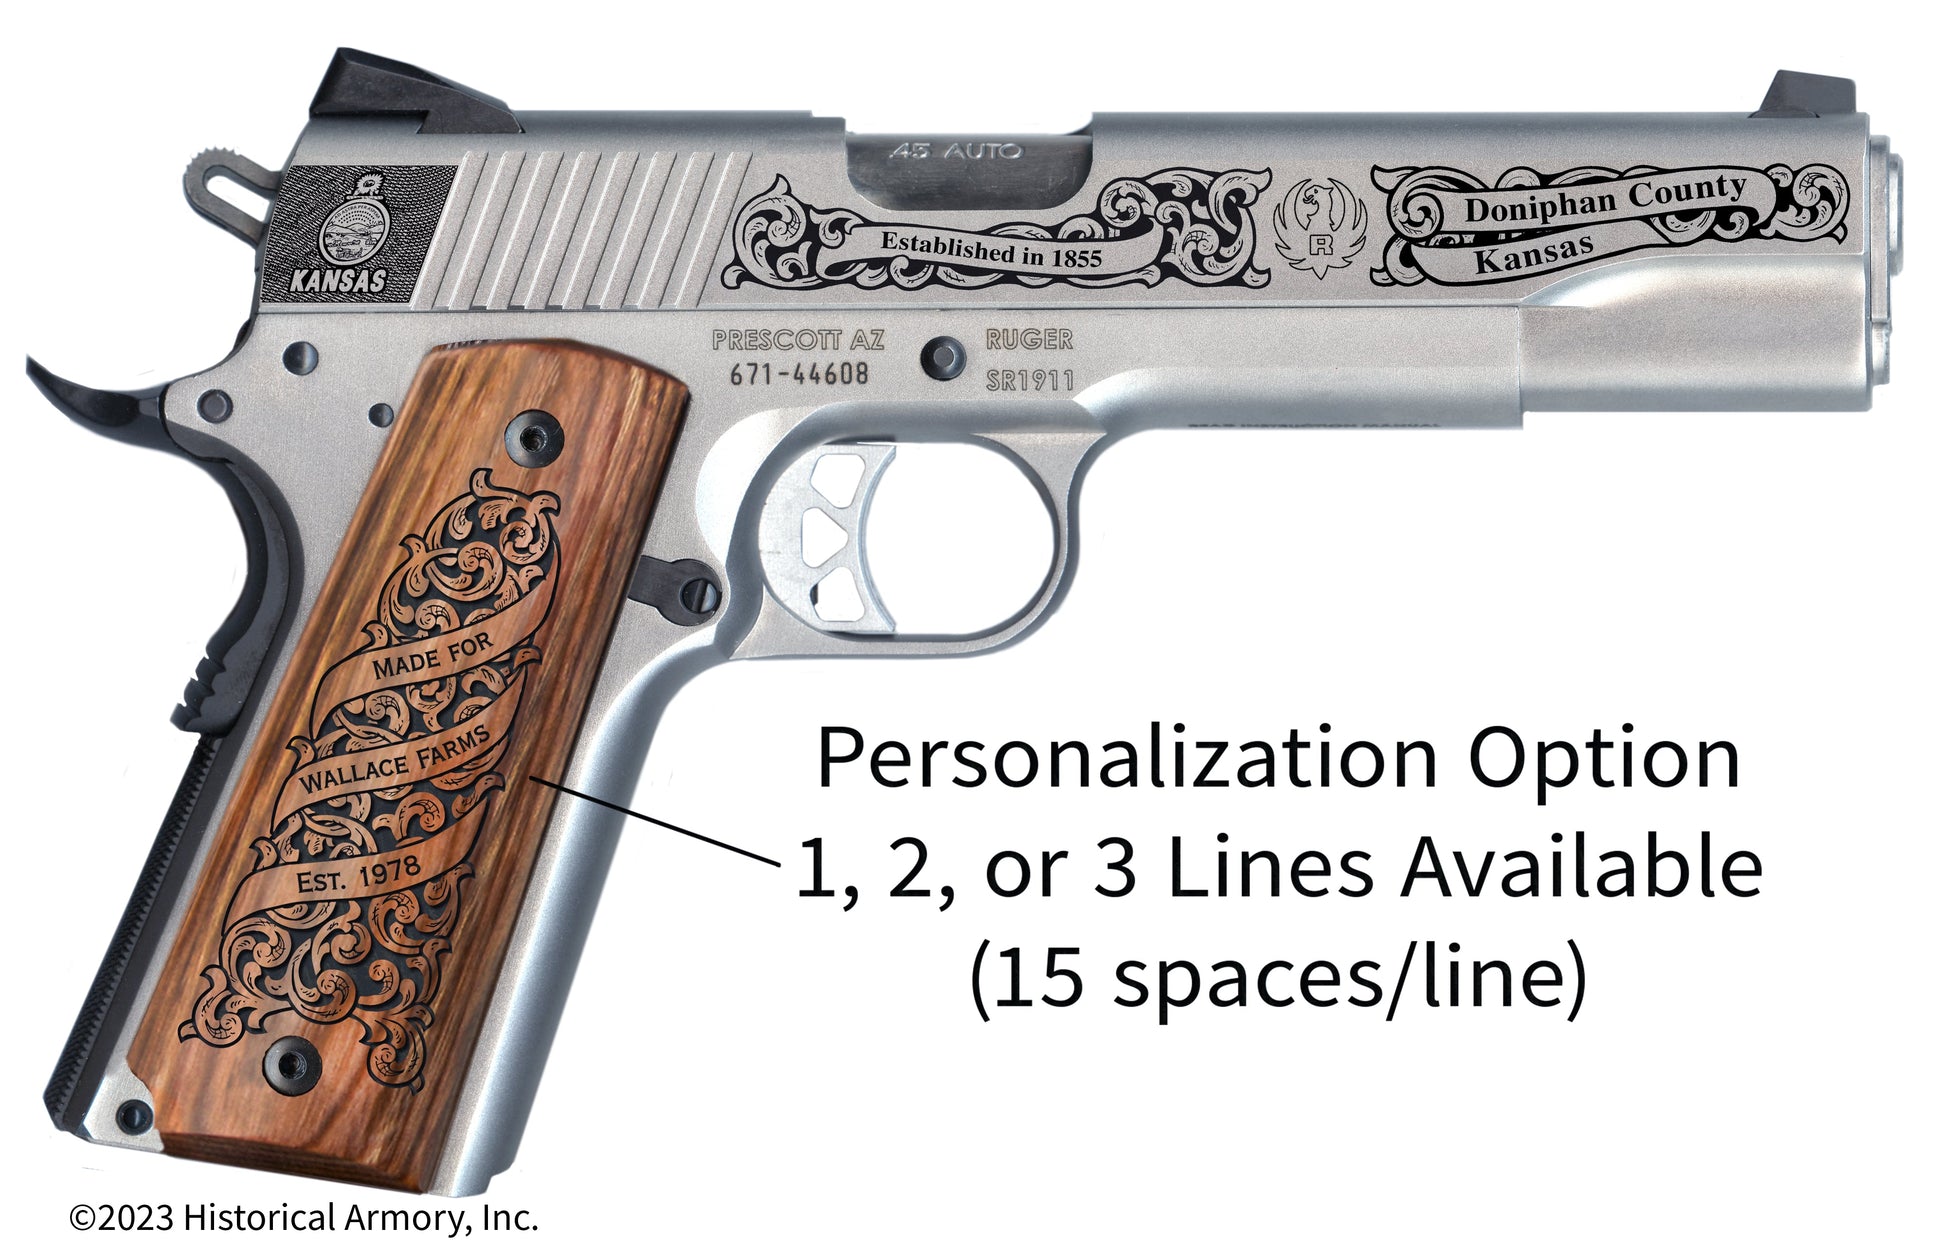 Doniphan County Kansas Personalized Engraved .45 Auto Ruger 1911